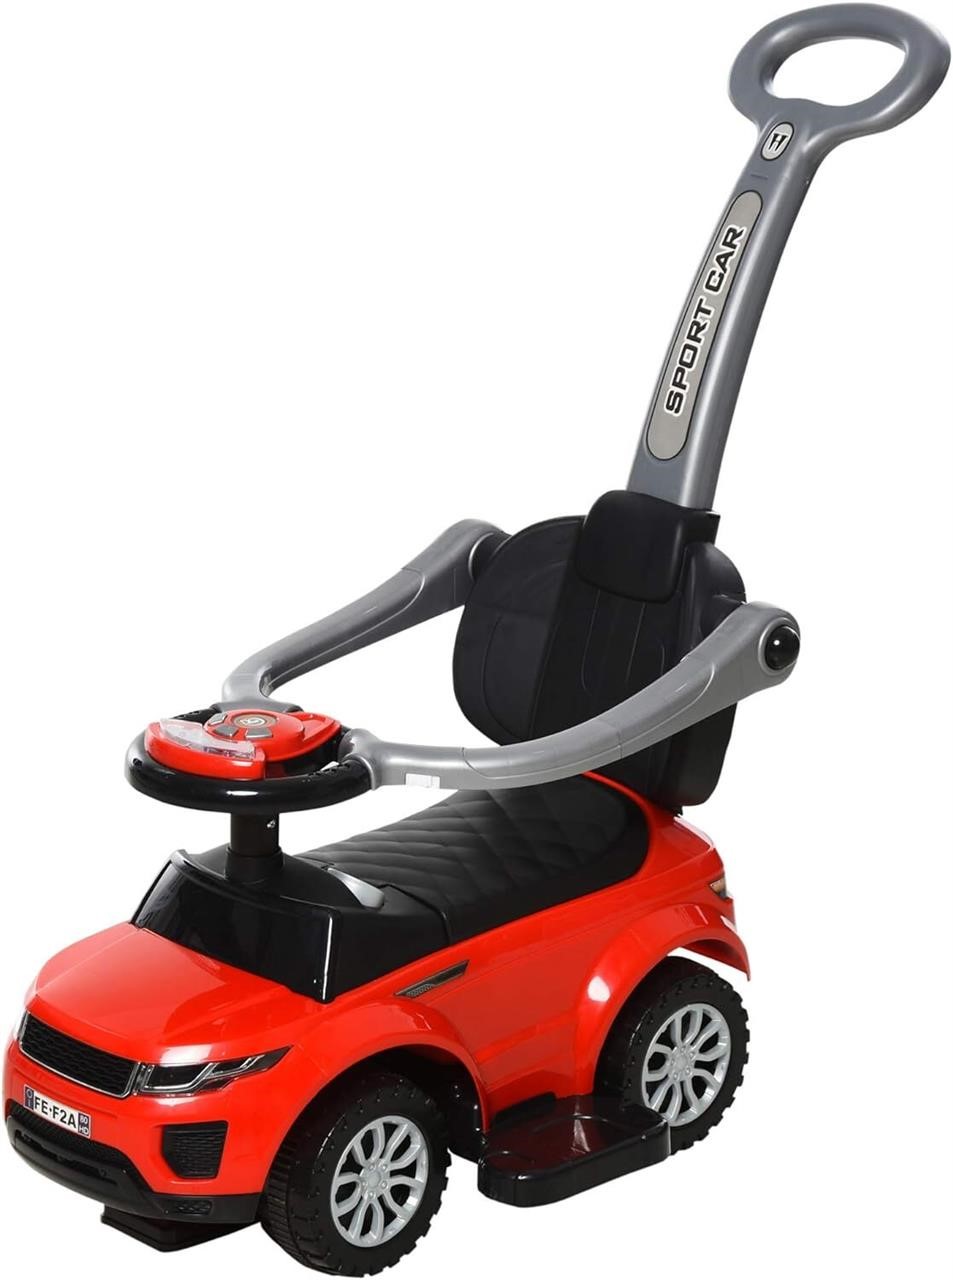 Aosom 3 in 1 Push Cars for Toddlers Kid Ride on Pu